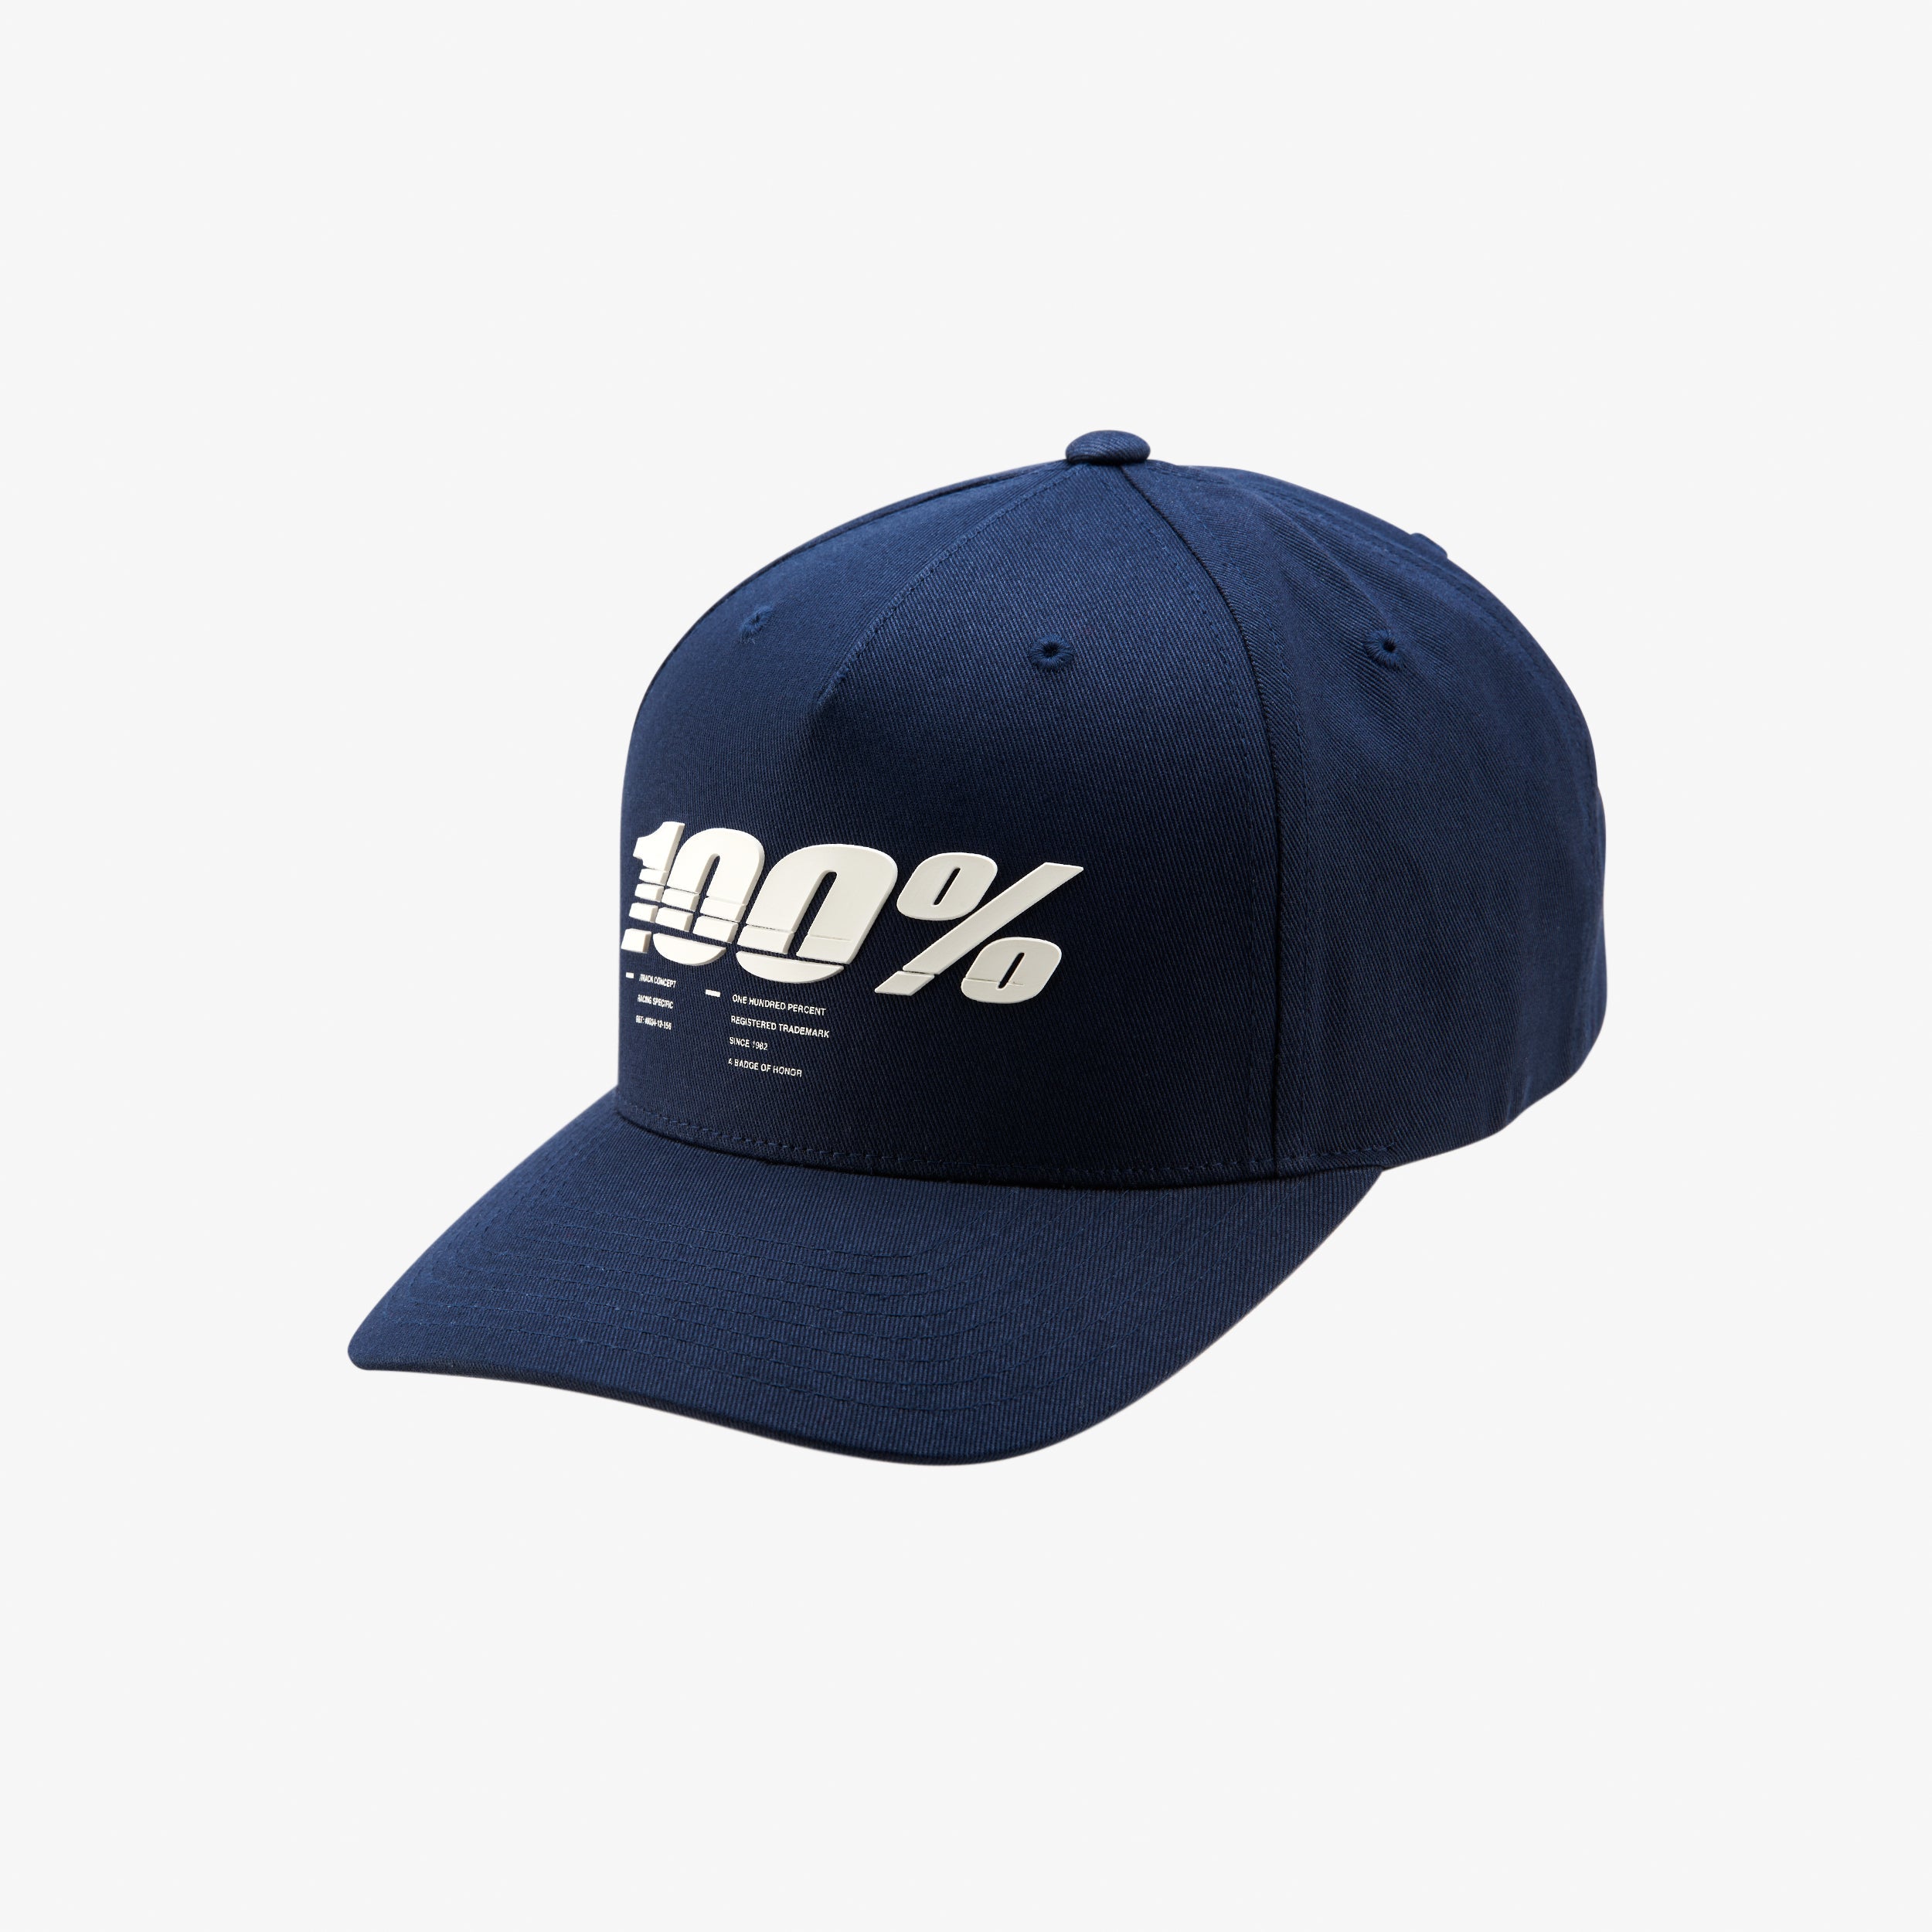 STAUNCH Snapback Cap X-Fit Navy